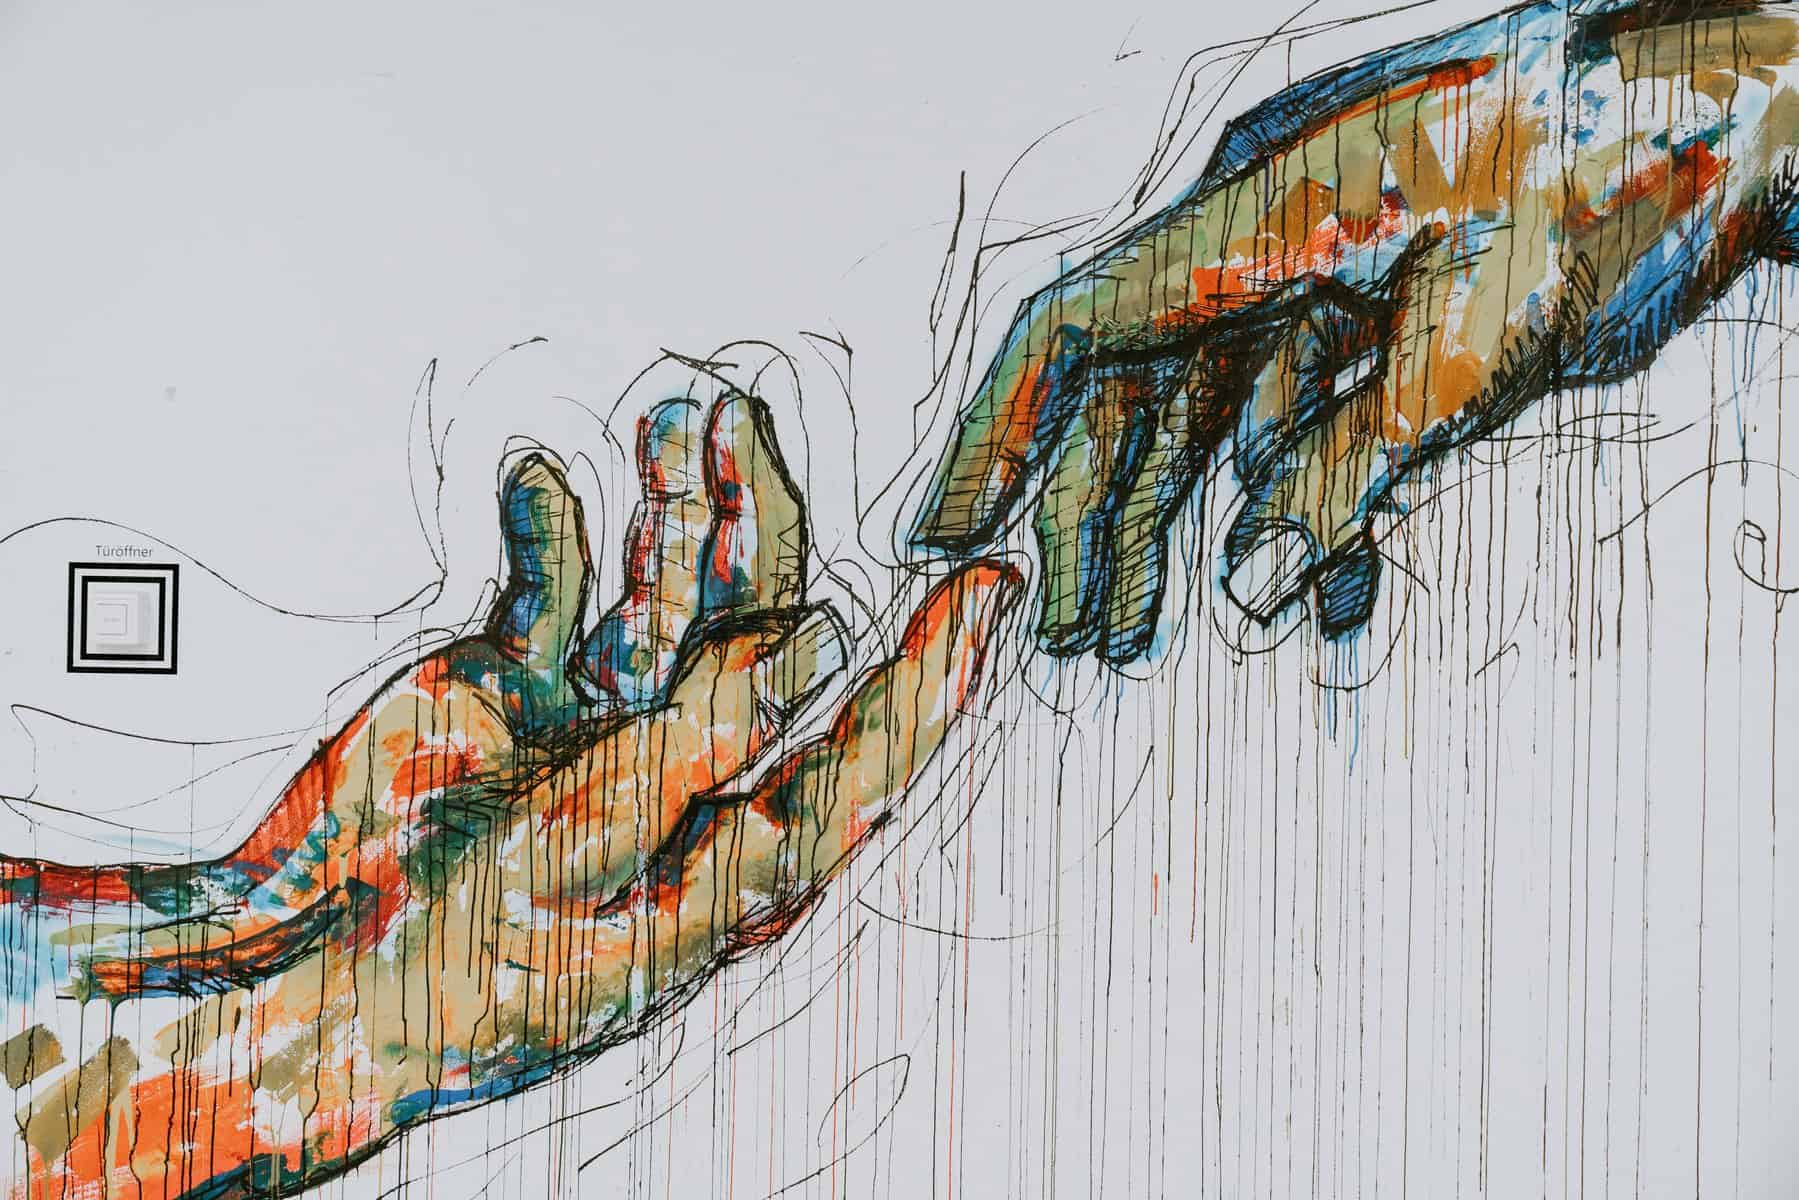 graphic design of two hands reaching to touch each other